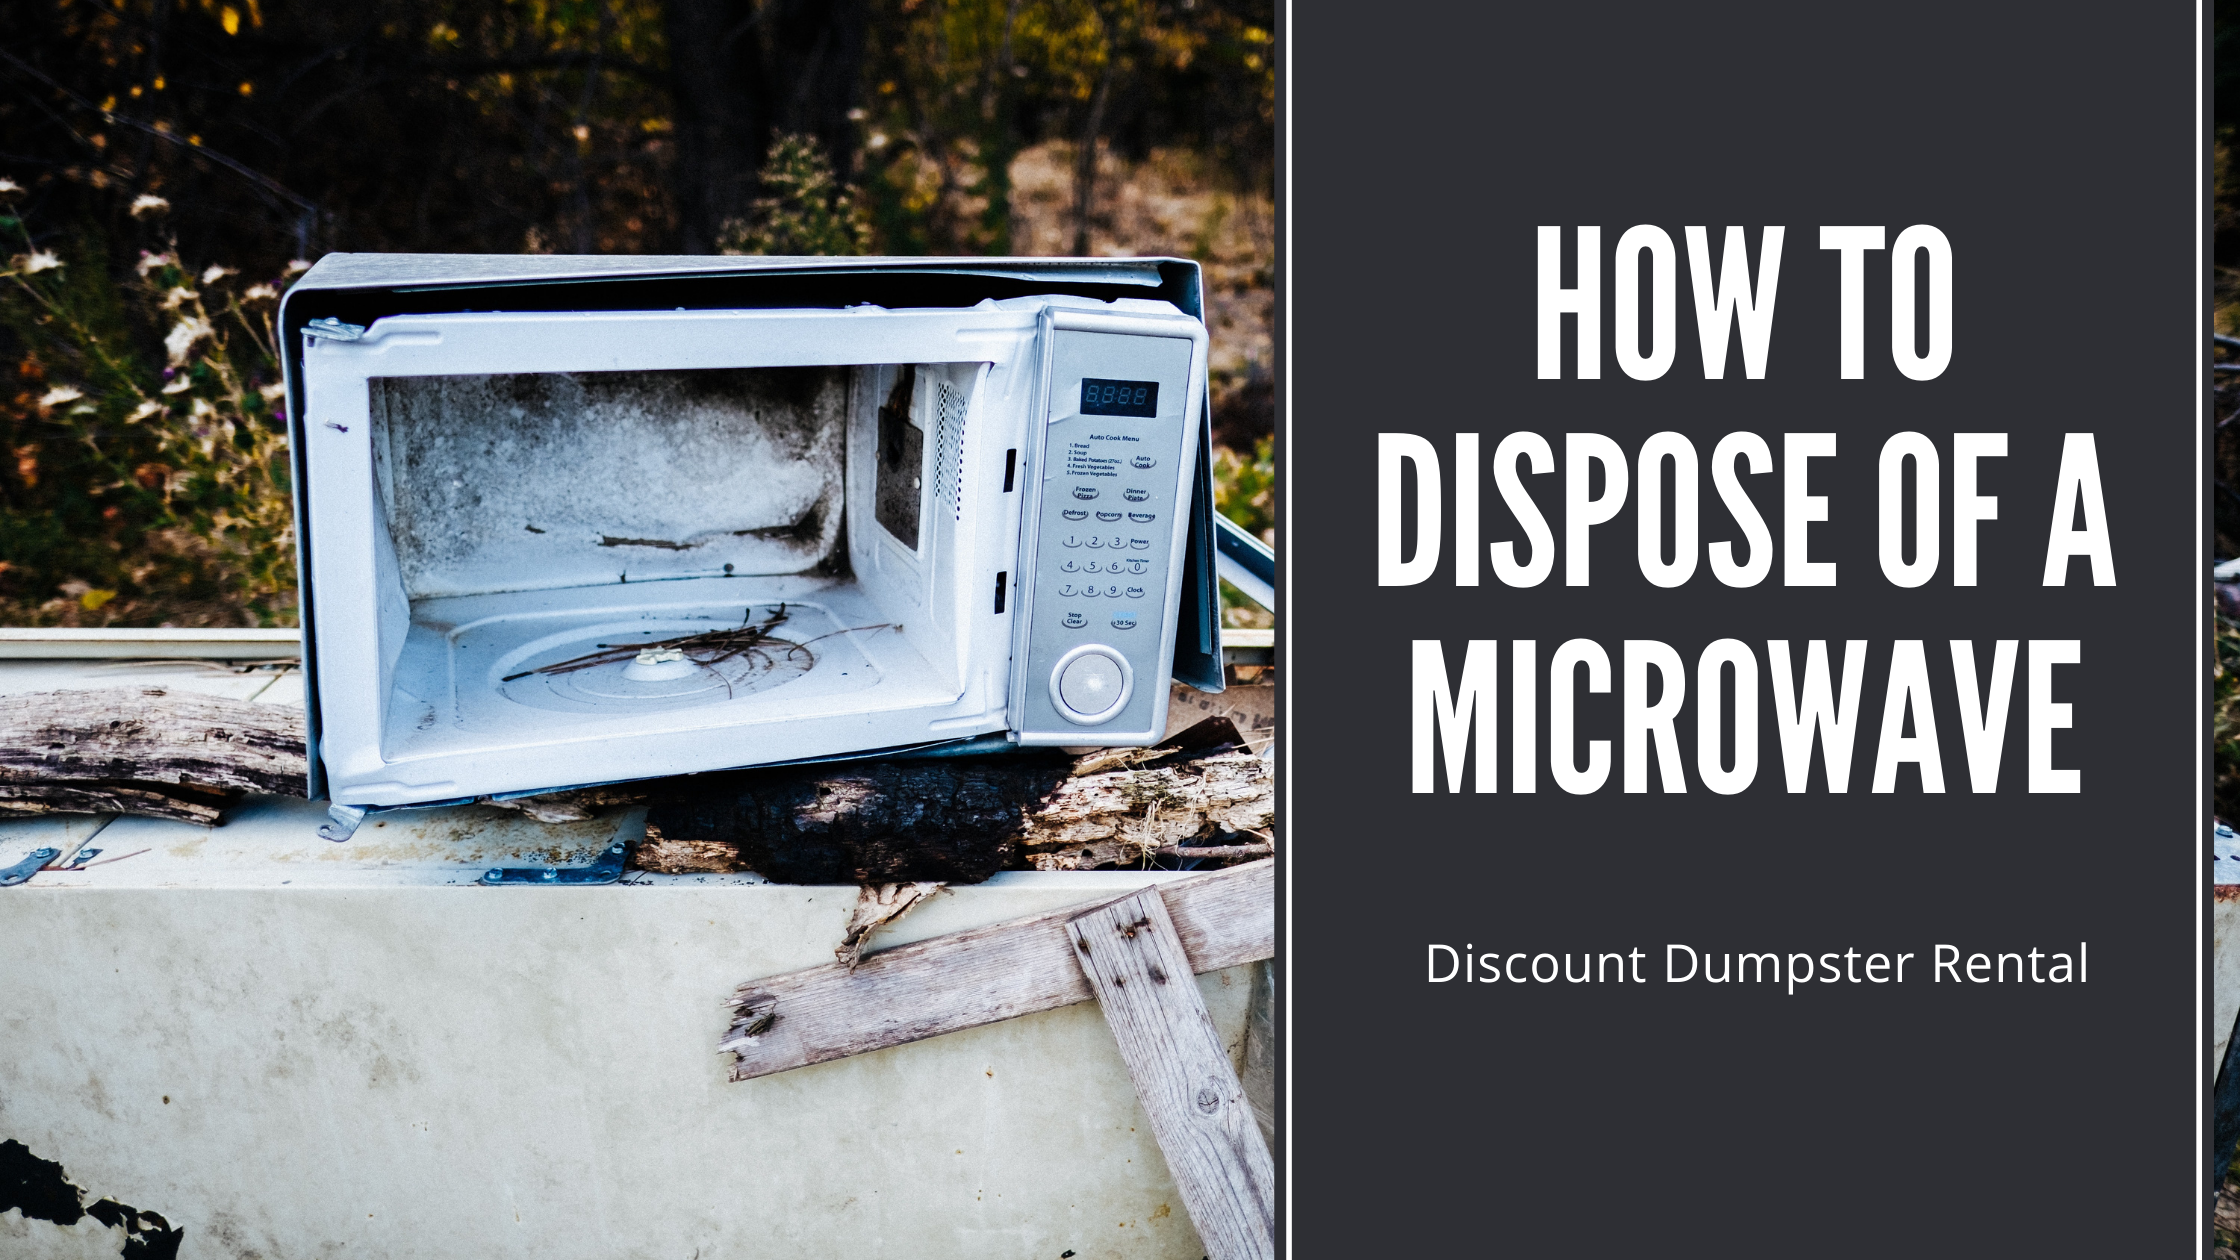 How to Dispose of a Microwave | Discount Dumpster